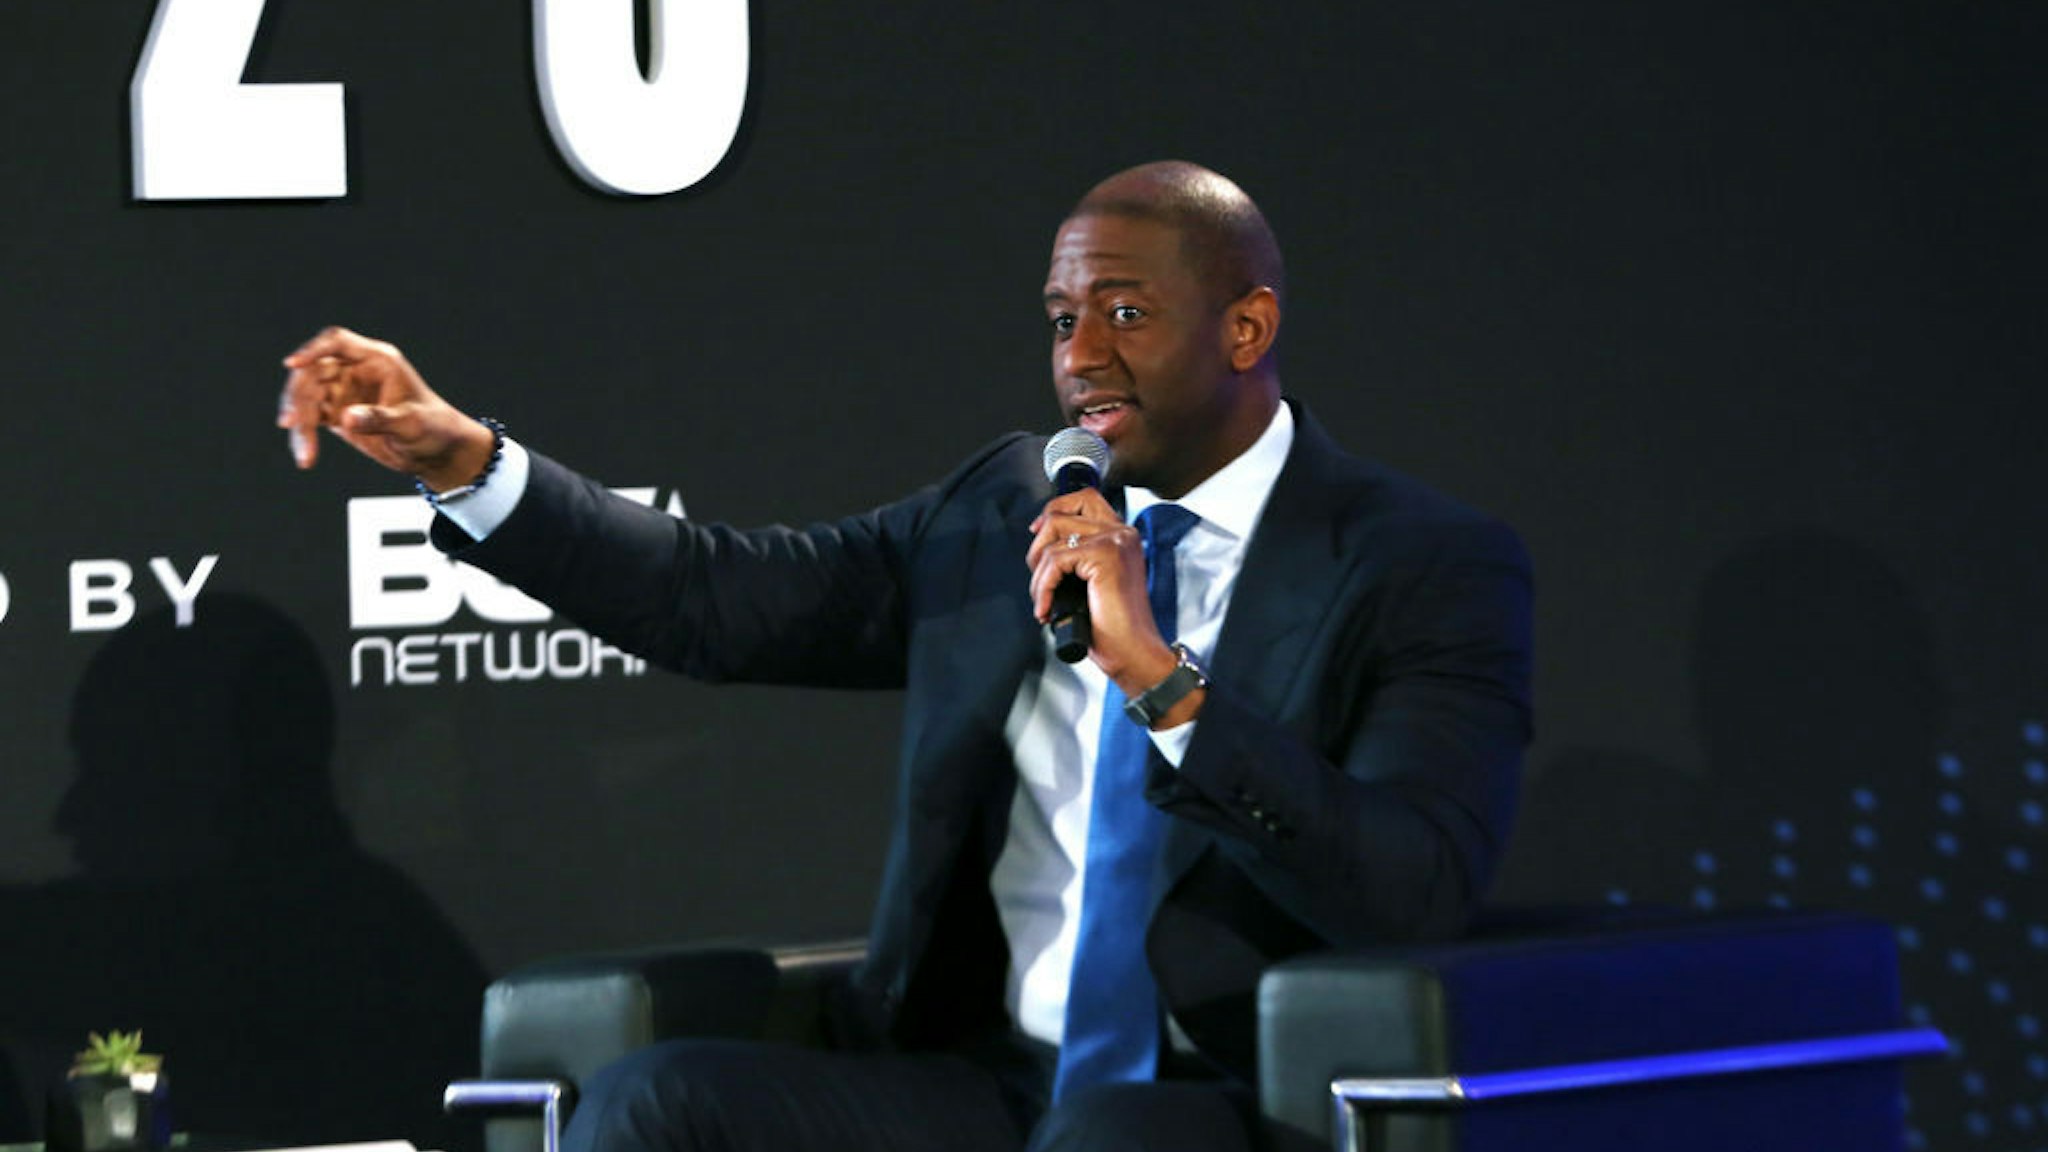 LOS ANGELES, CALIFORNIA - FEBRUARY 20: Andrew Gillum speaks onstage during META ‚Äì Convened By BET Networks at The Edition Hotel on February 20, 2020 in Los Angeles, California. (Photo by Robin L Marshall/Getty Images for BET)